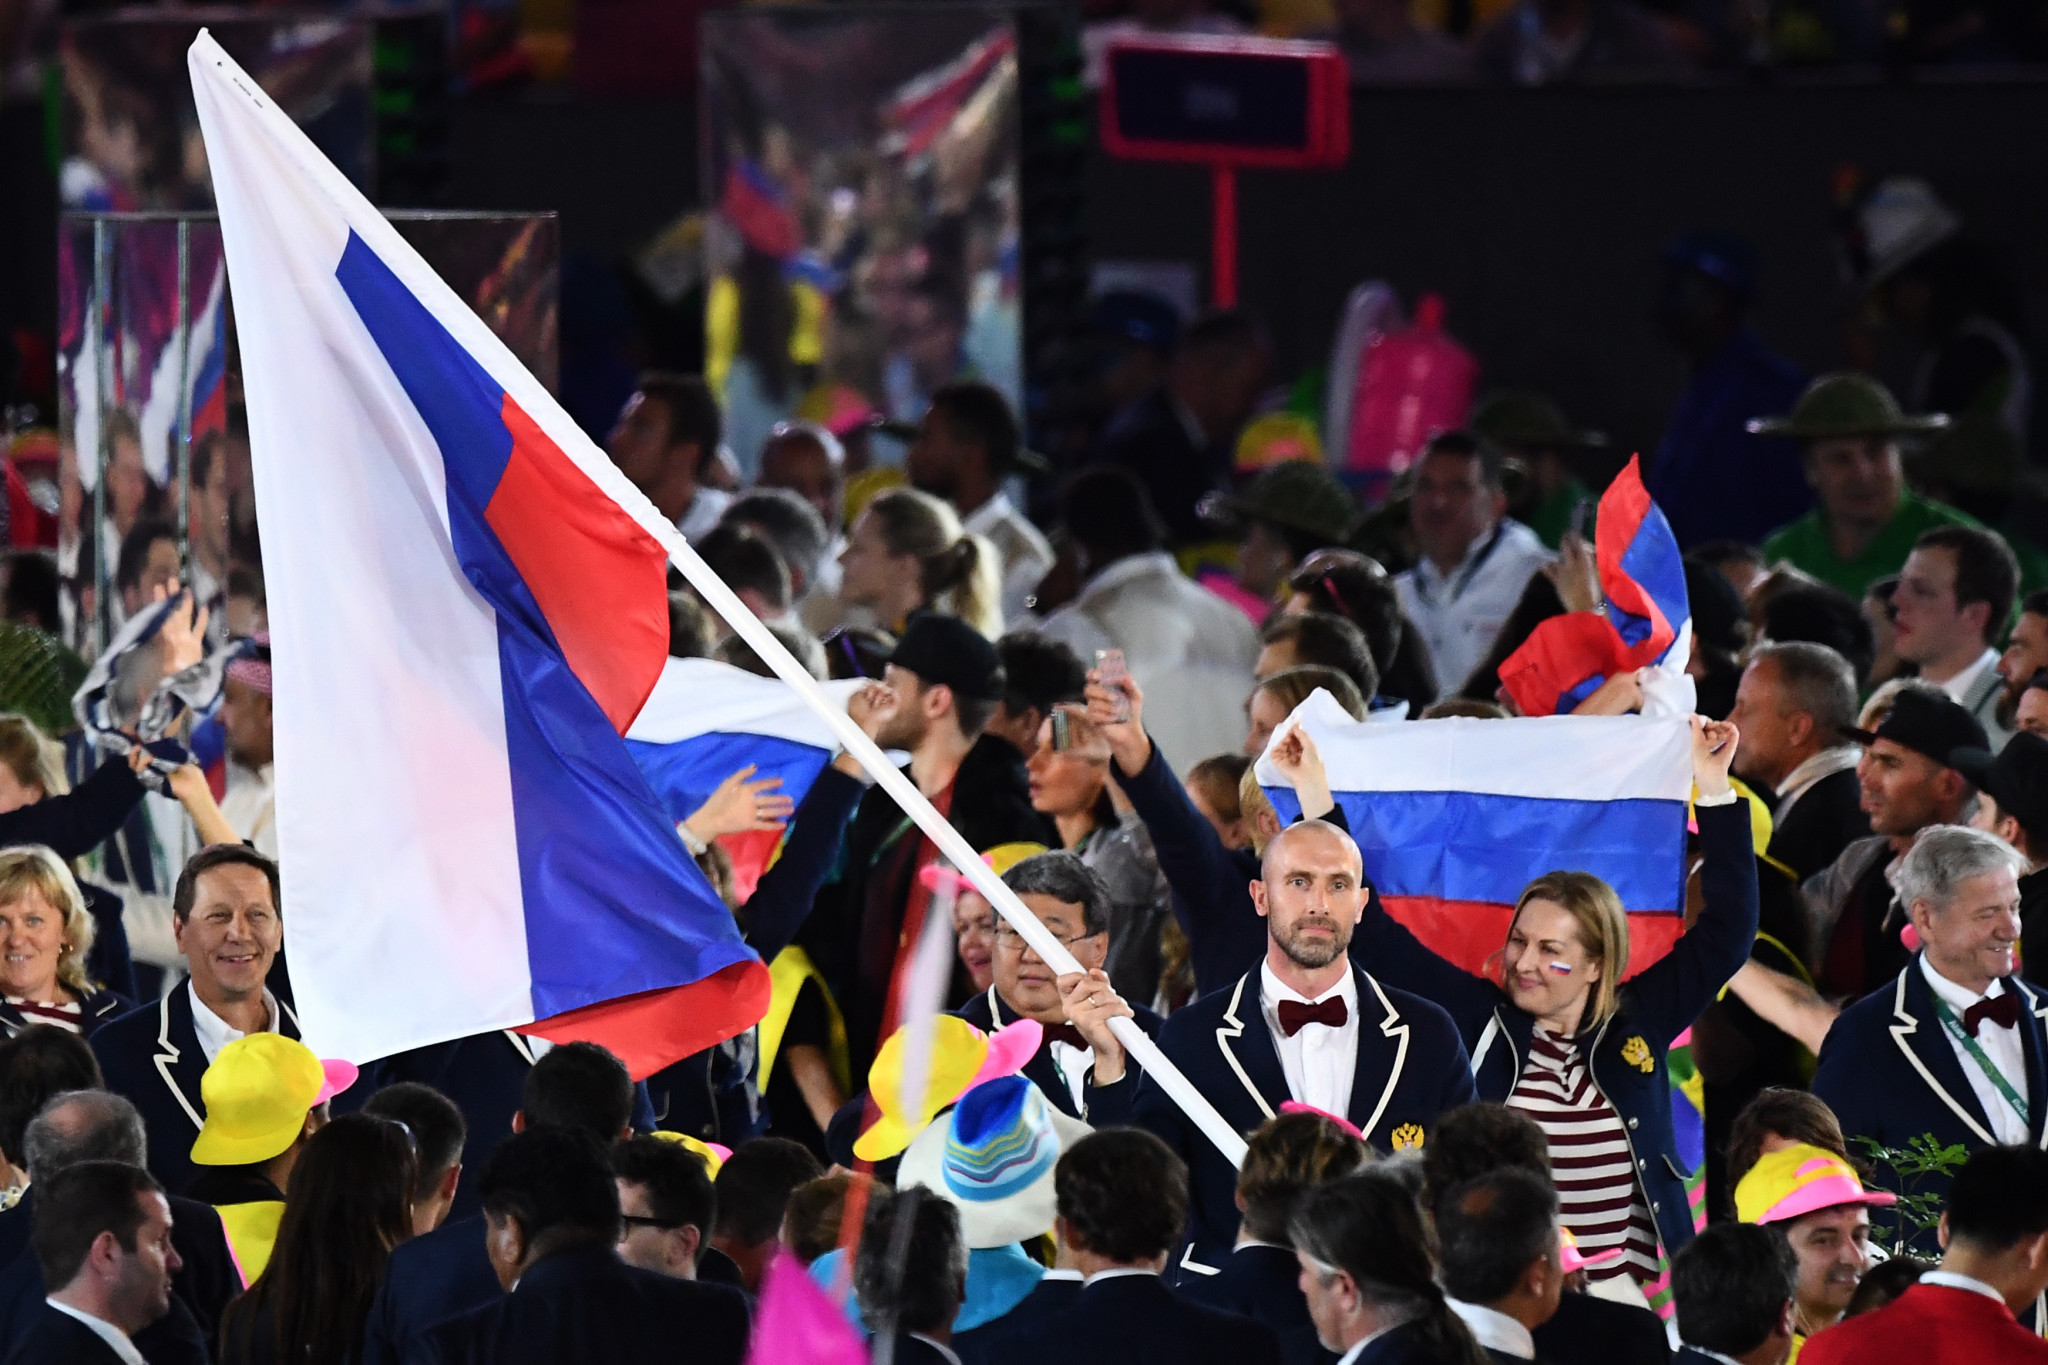 The Russian flag and anthem will not feature at the next two scheduled Olympics and Paralympics, in Tokyo and Beijing, following sanctions imposed by WADA and upheld by CAS ©Getty Images